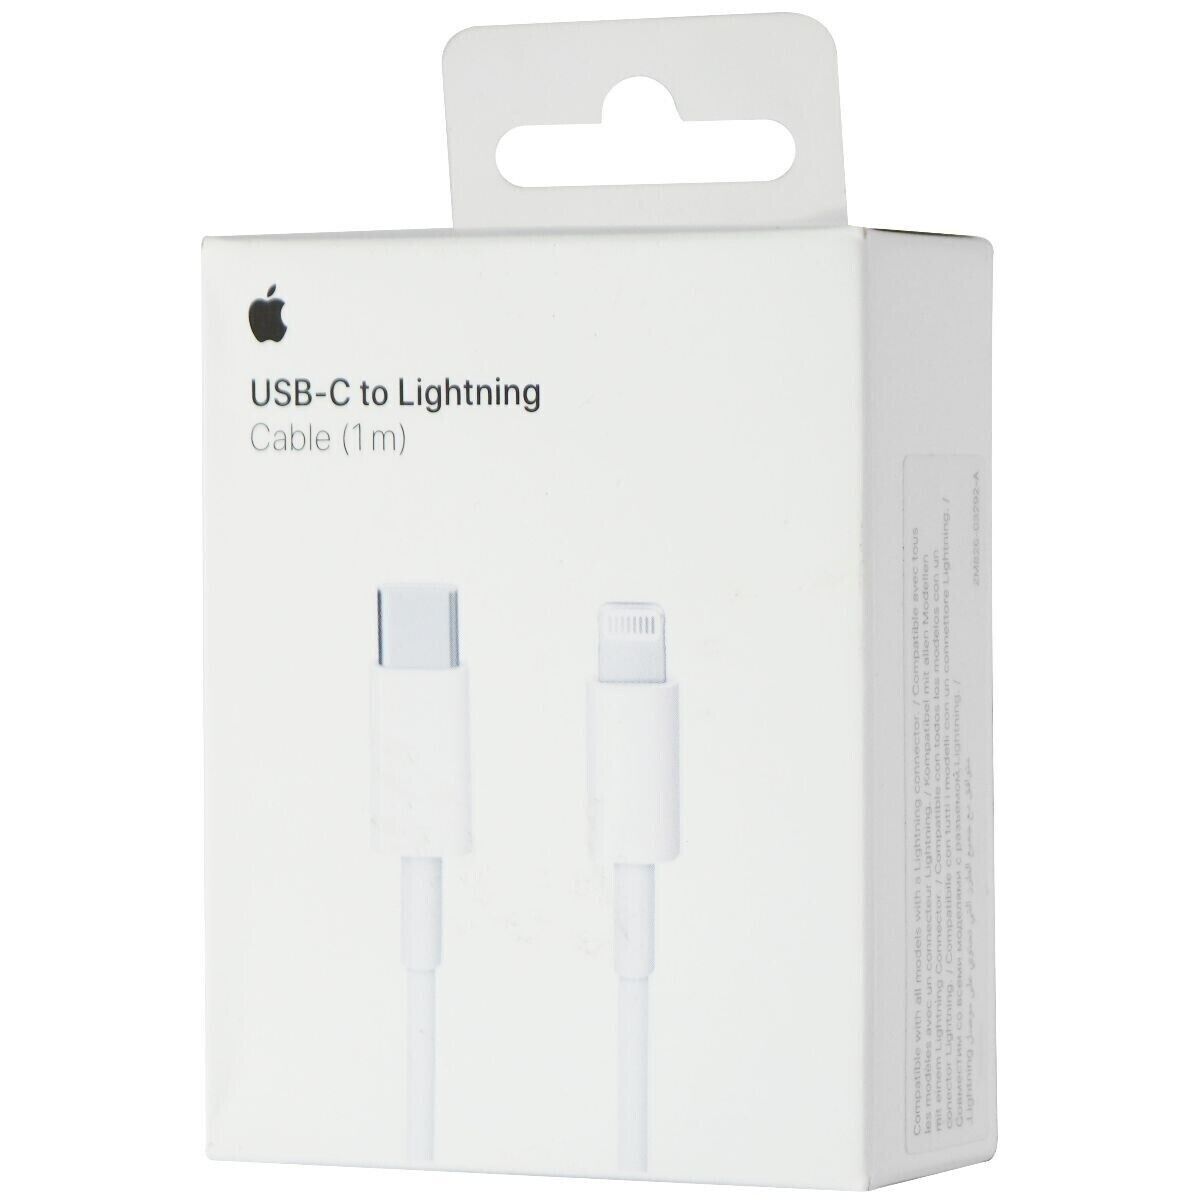 Apple Charge Cable USB-C to lighnting For iPad / iPhone / iPod 2mts (7ft)